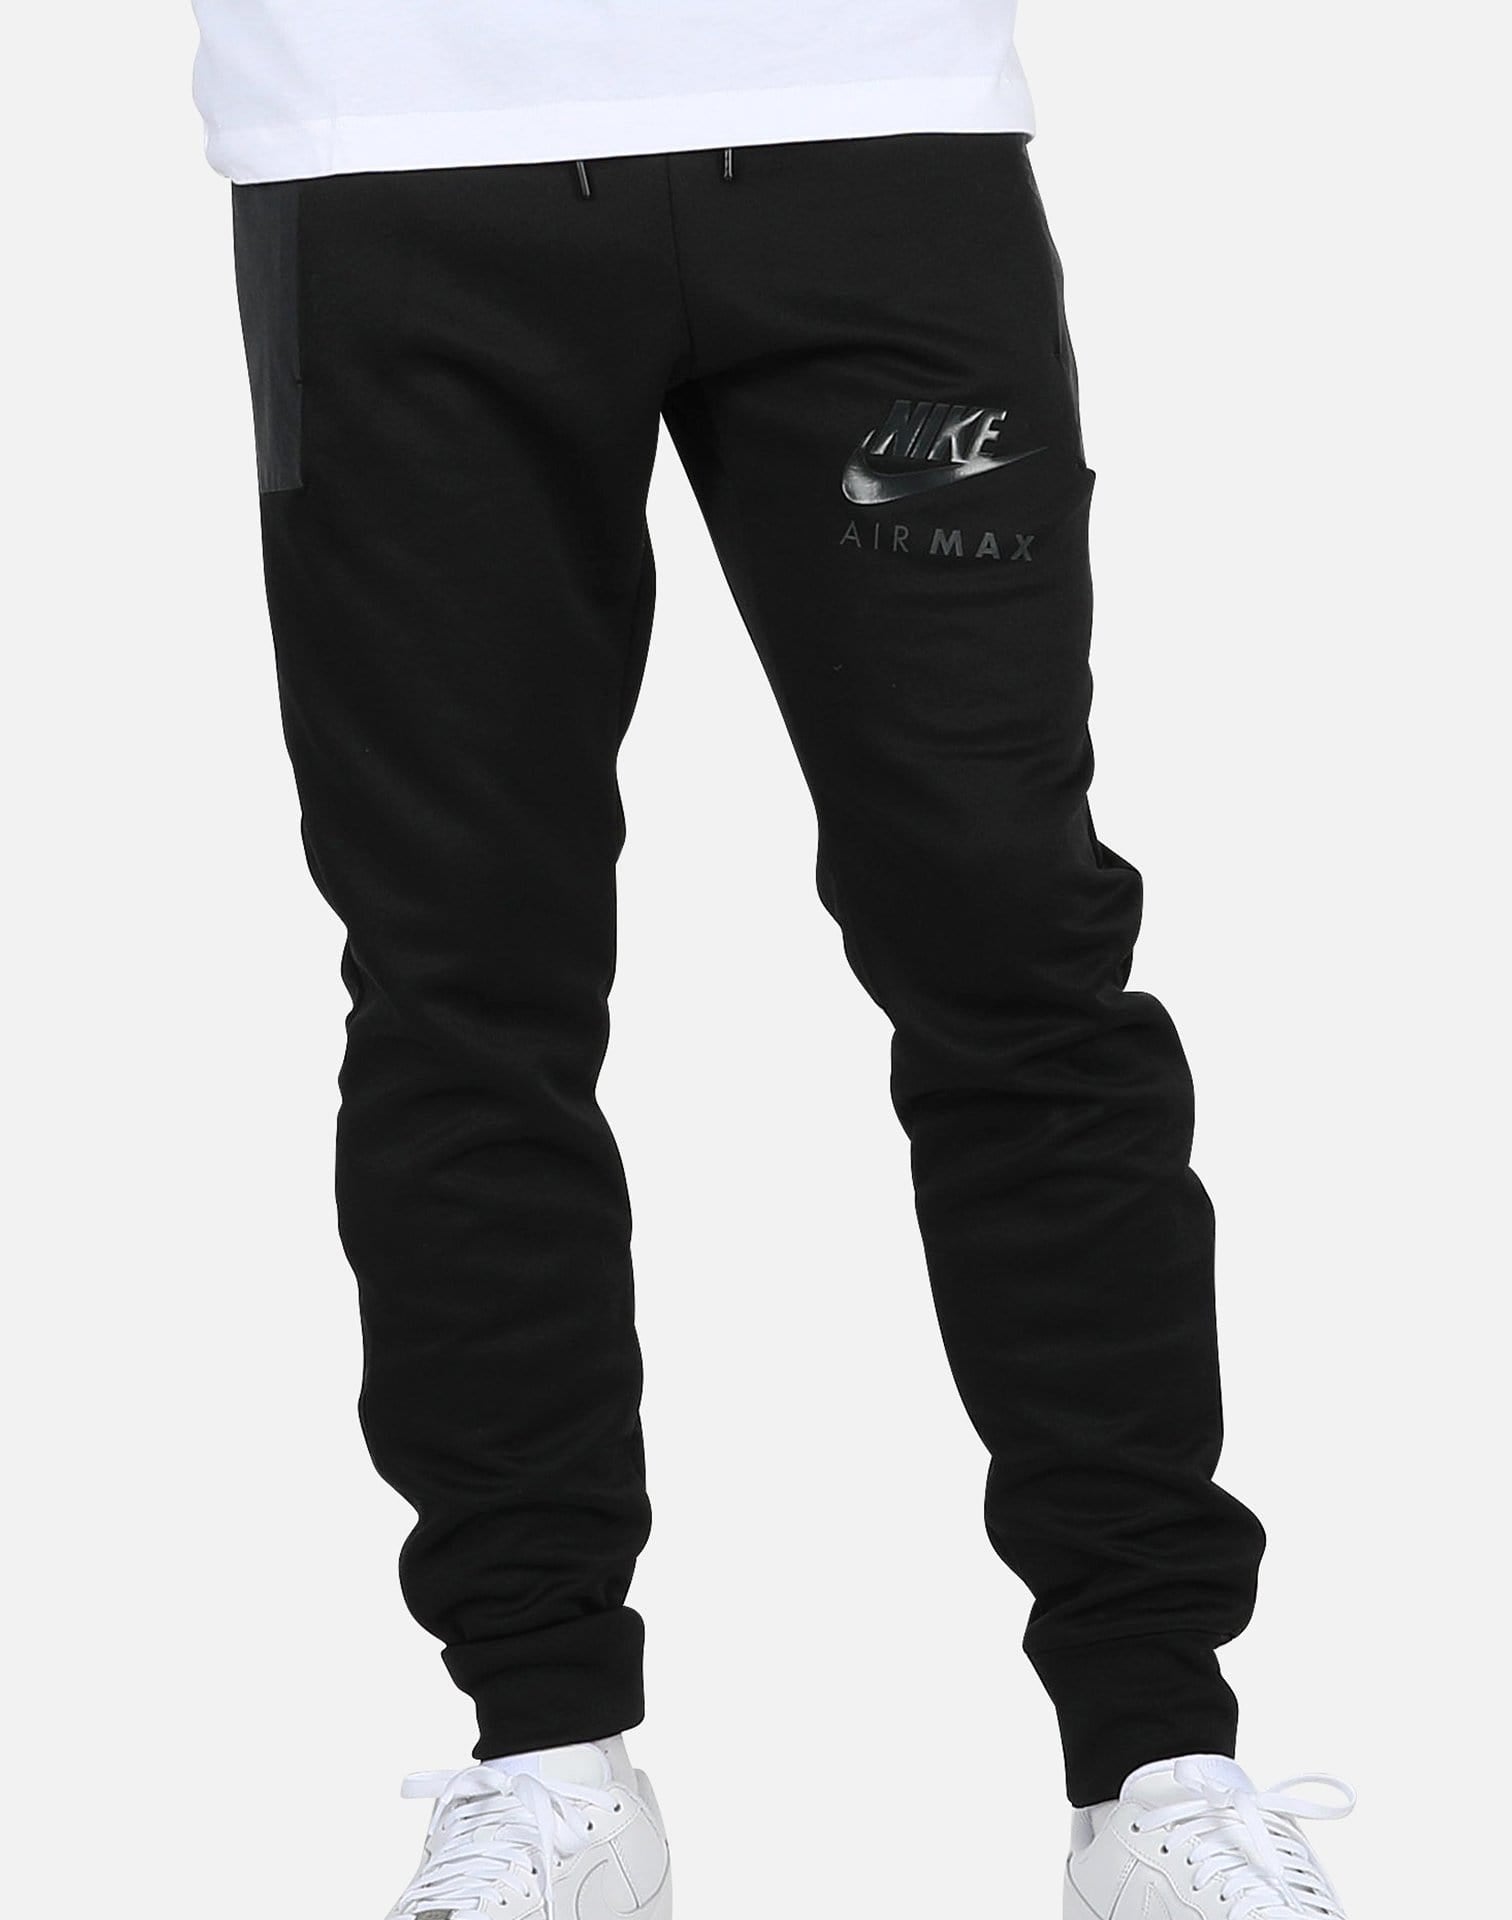 NSW AIR MAX JOGGERS – DTLR